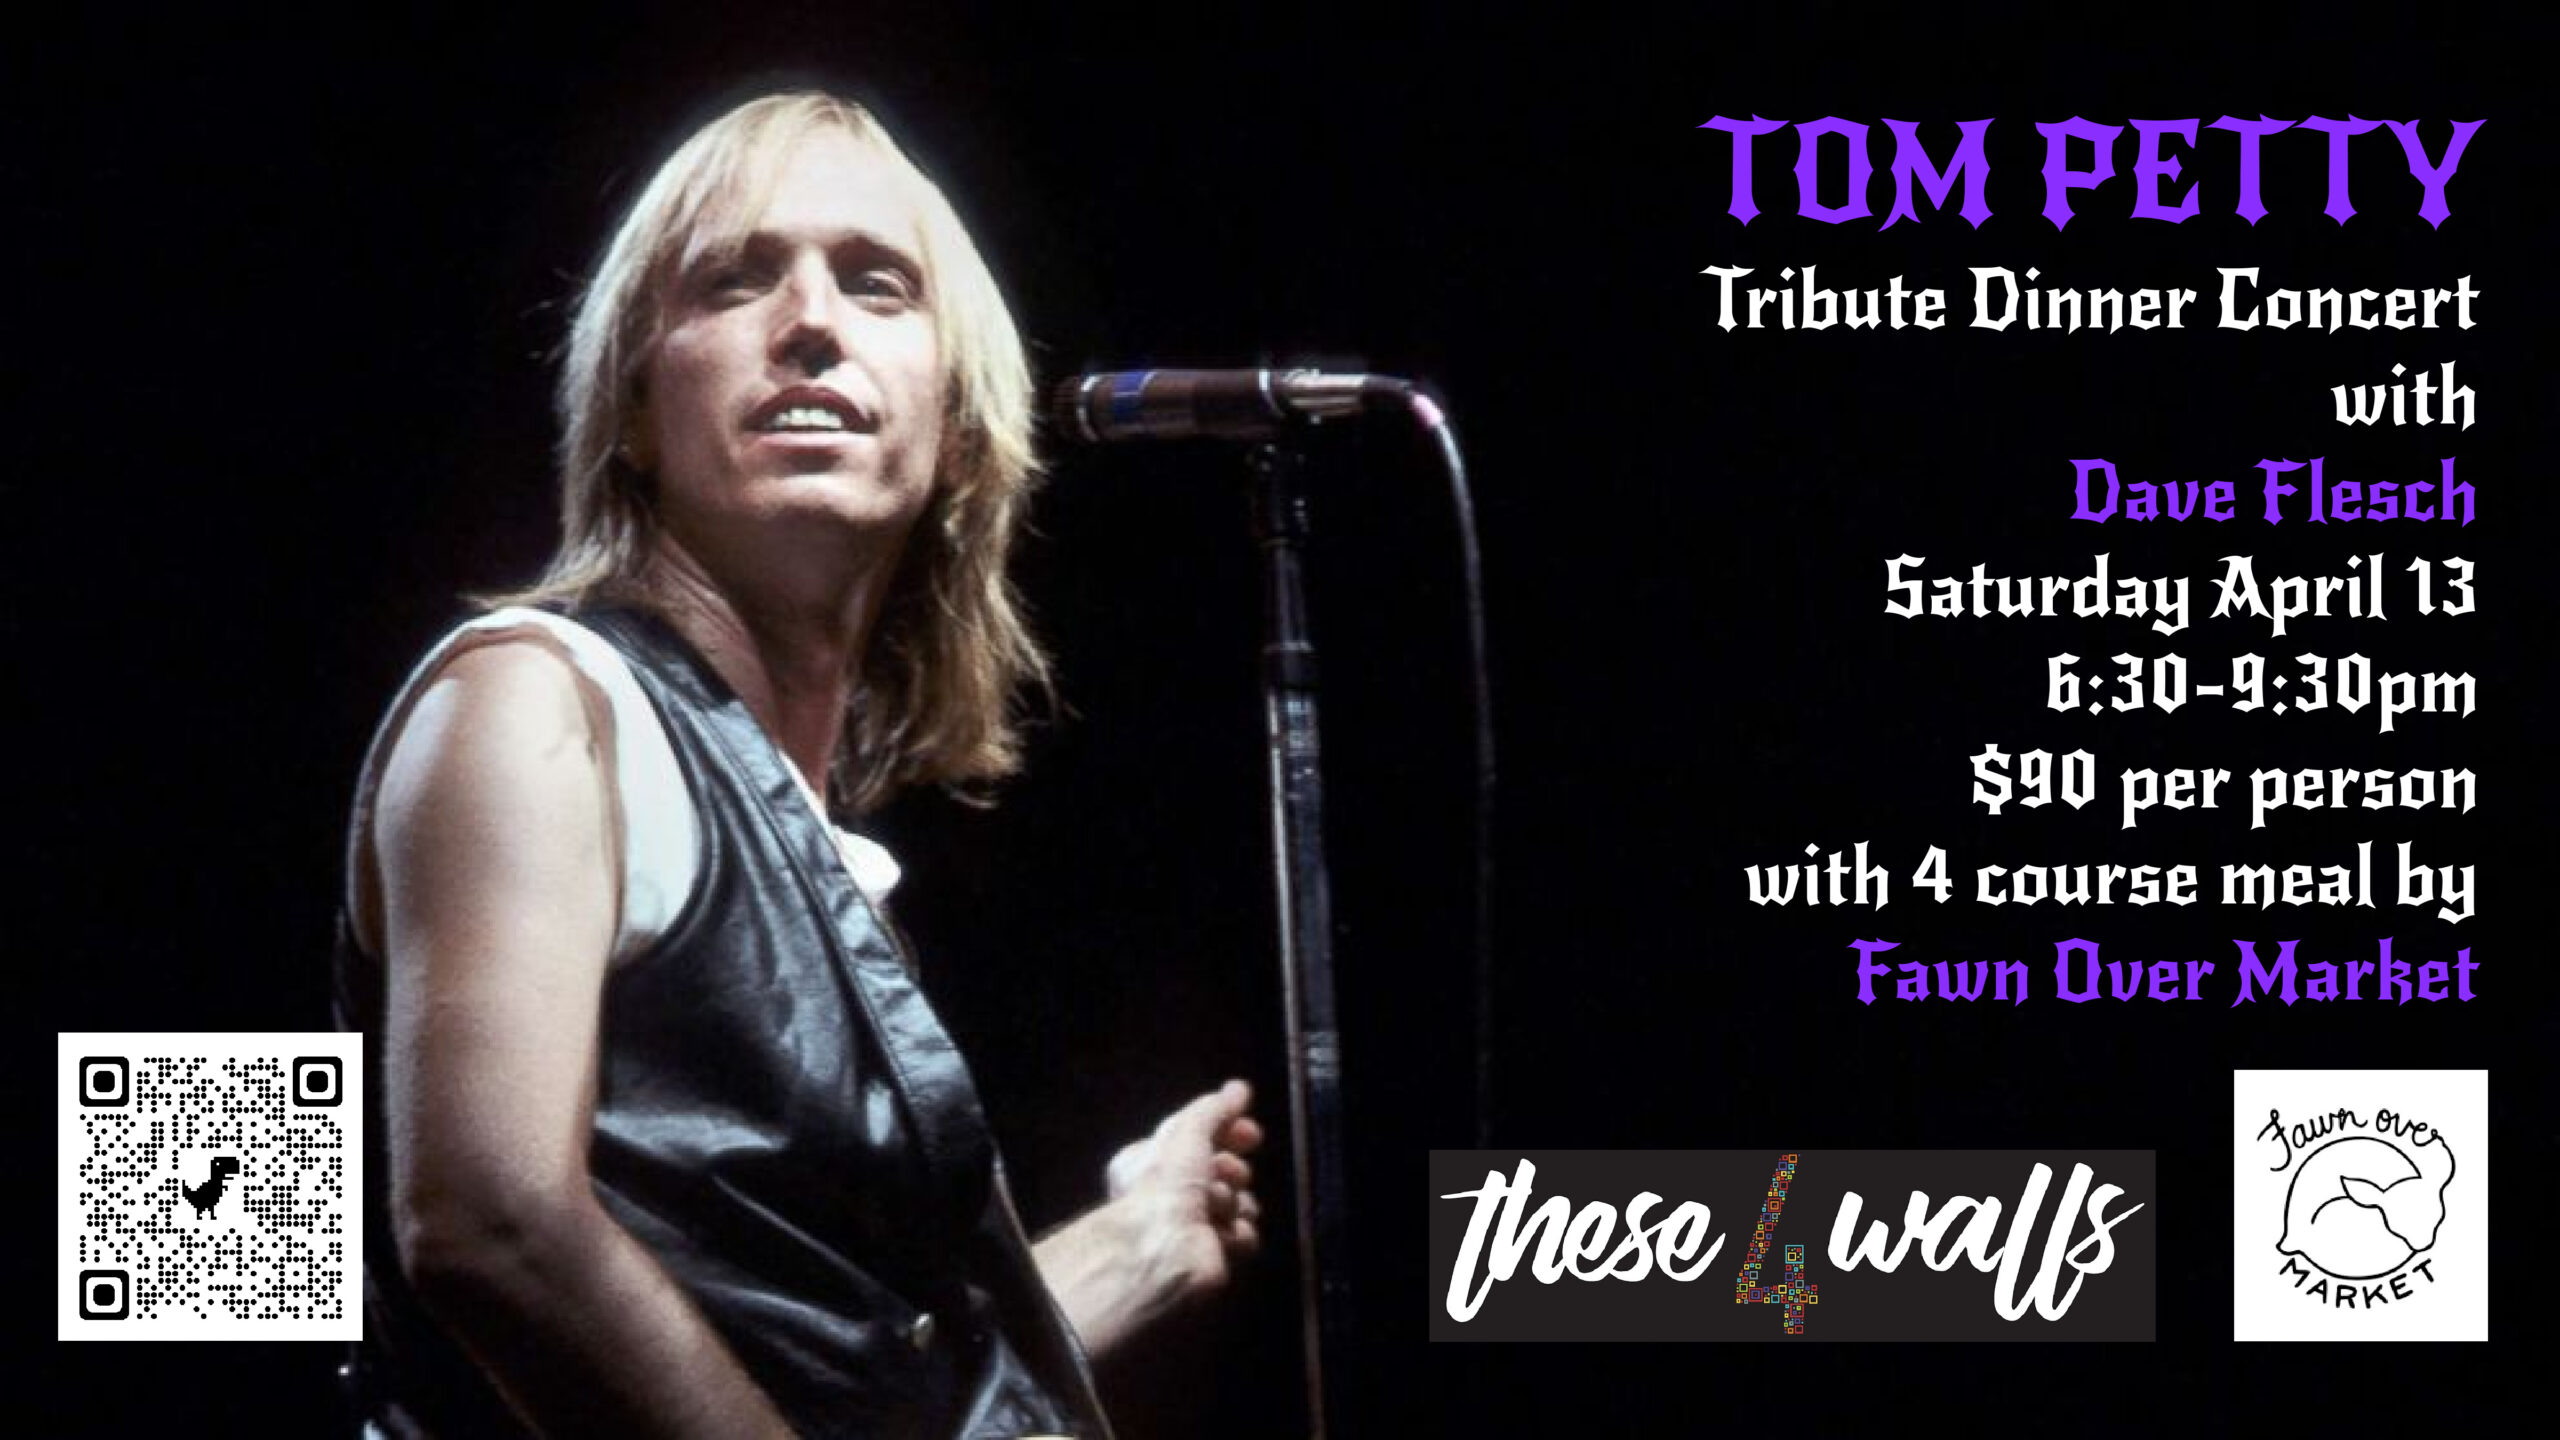 event poster featuring photo of tom petty. Titled "Tom Petty Tribute Dinner Concert"